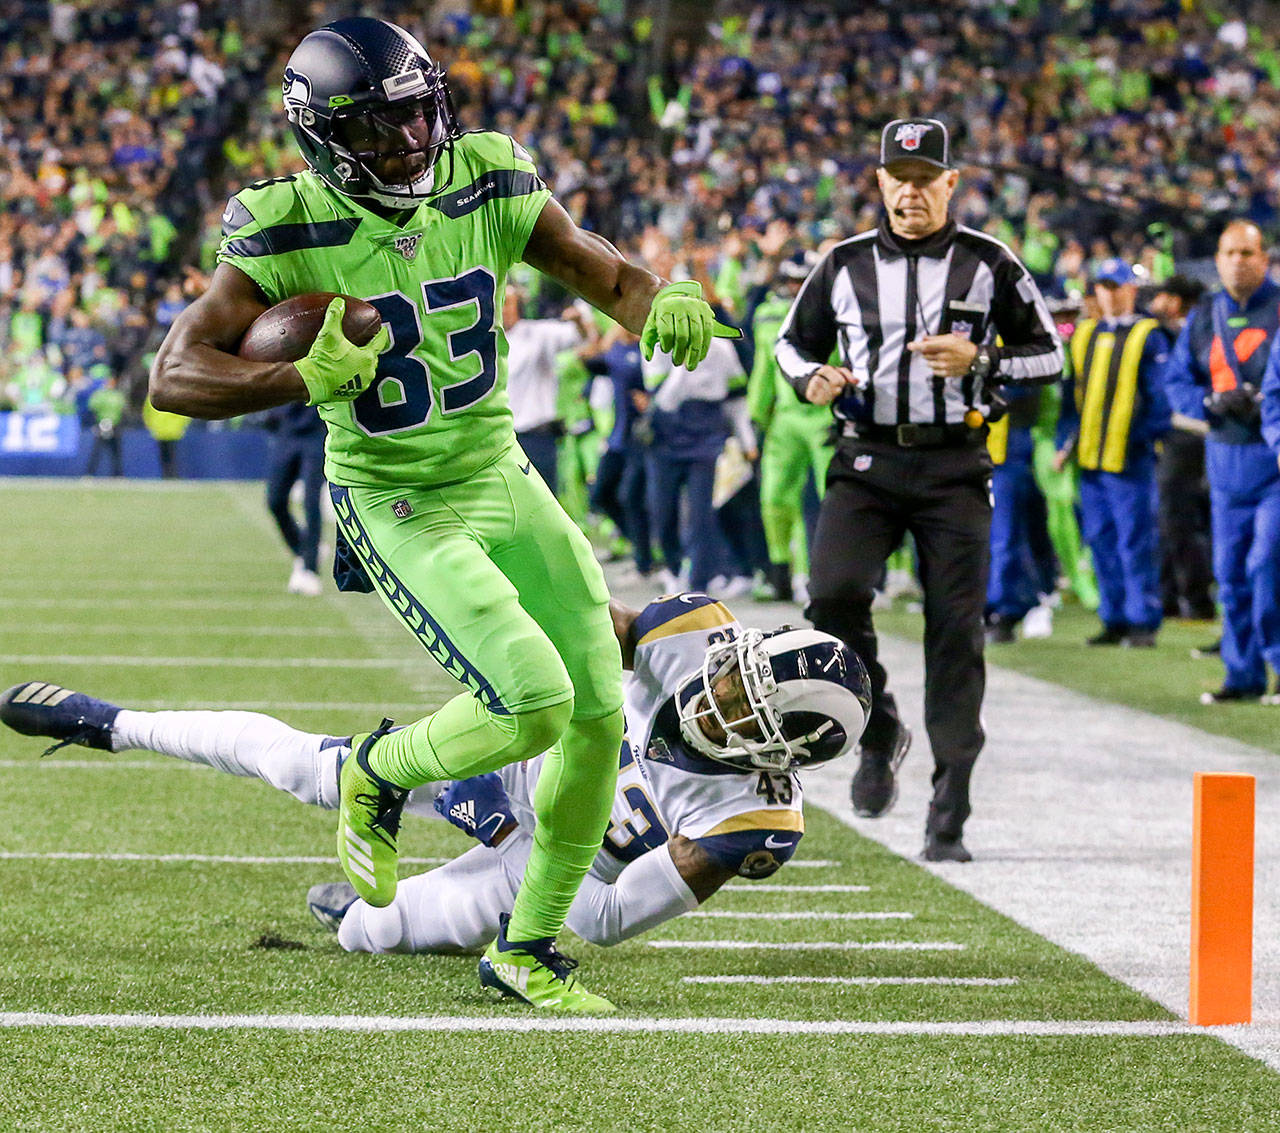 Seattle’s David Moore (83) scores on a 10-yard touchdown pass as the L.A. Rams John Johnson dives to stop him in the third quarter of the Seahawks 30-29 win Thursday at CenturyLink Field in Seattle. (Kevin Clark / The Herald)